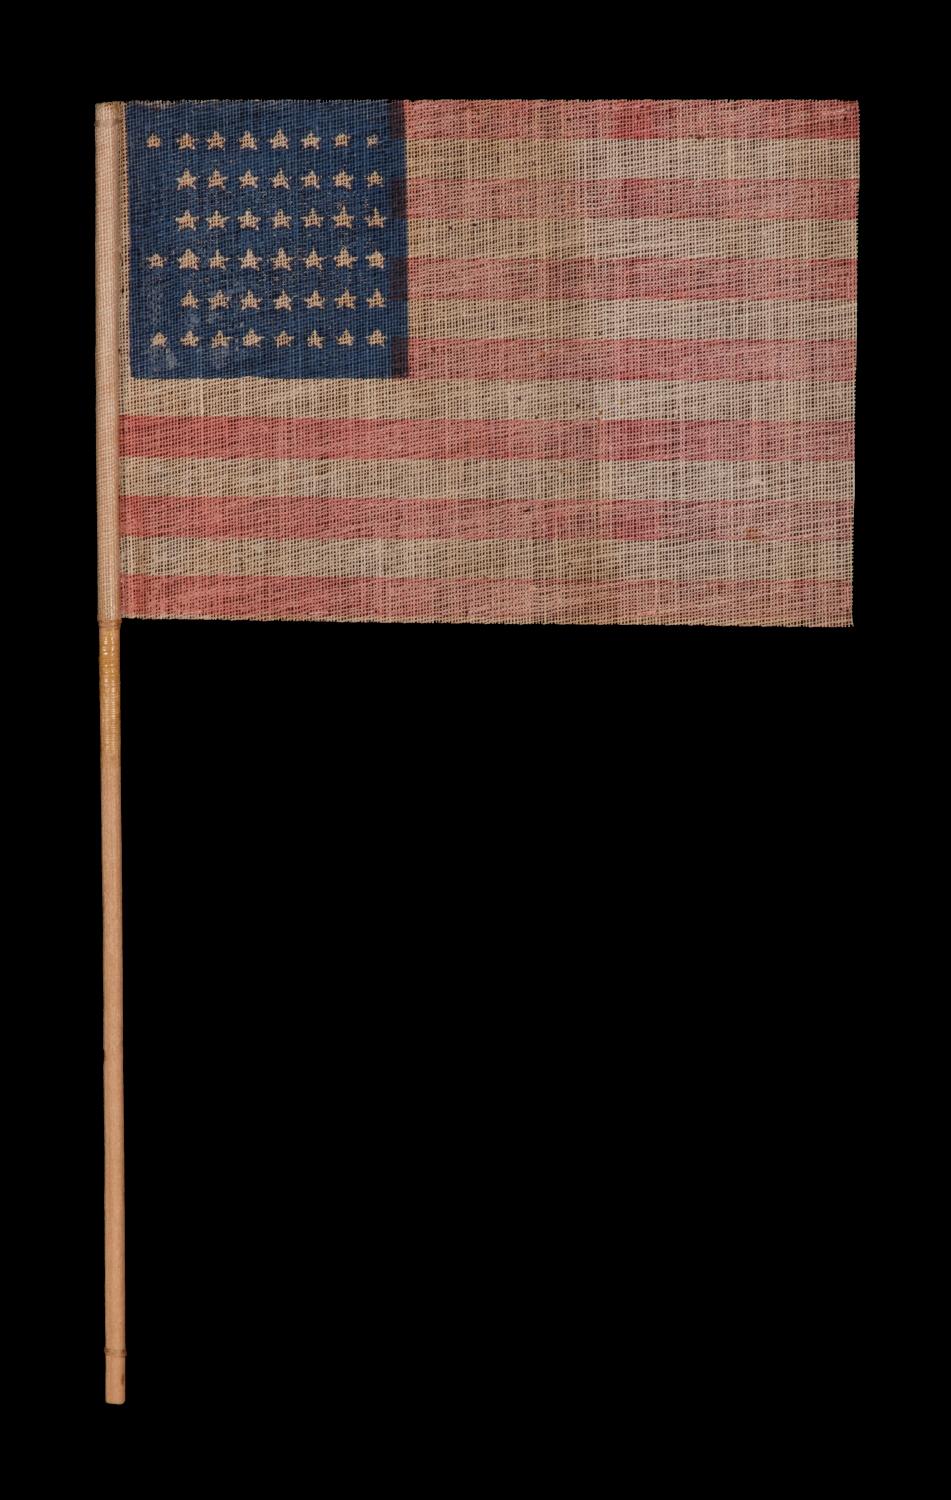 45 STAR ANTIQUE AMERICAN PARADE FLAG WITH ITS STARS ARRANGED IN A NOTCHED PATTERN, 1896-1908, UTAH STATEHOOD 

45 star American national flag, printed on coarse cotton, with its stars arranged in what has been termed a 